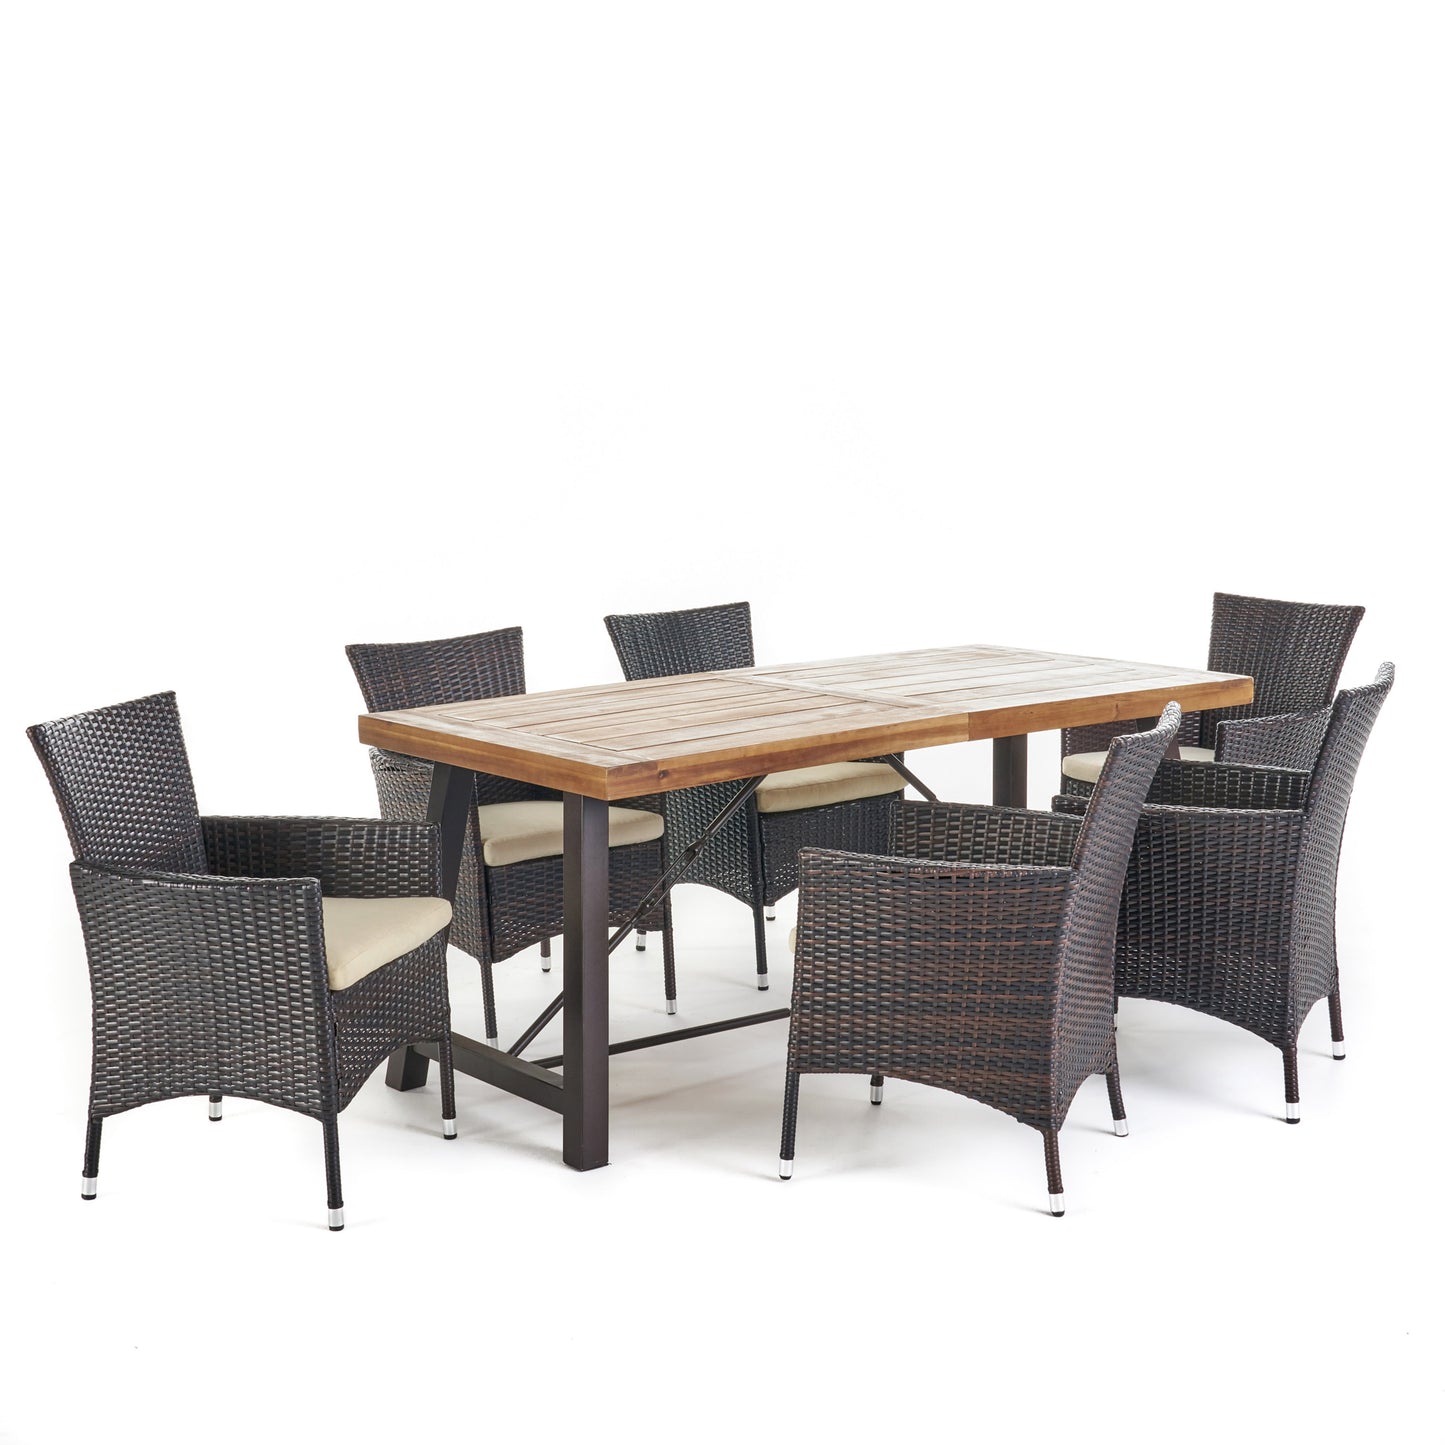 Toretto Outdoor 7 Piece Dining Set with Teak Finished Wood Table and Brown Chairs